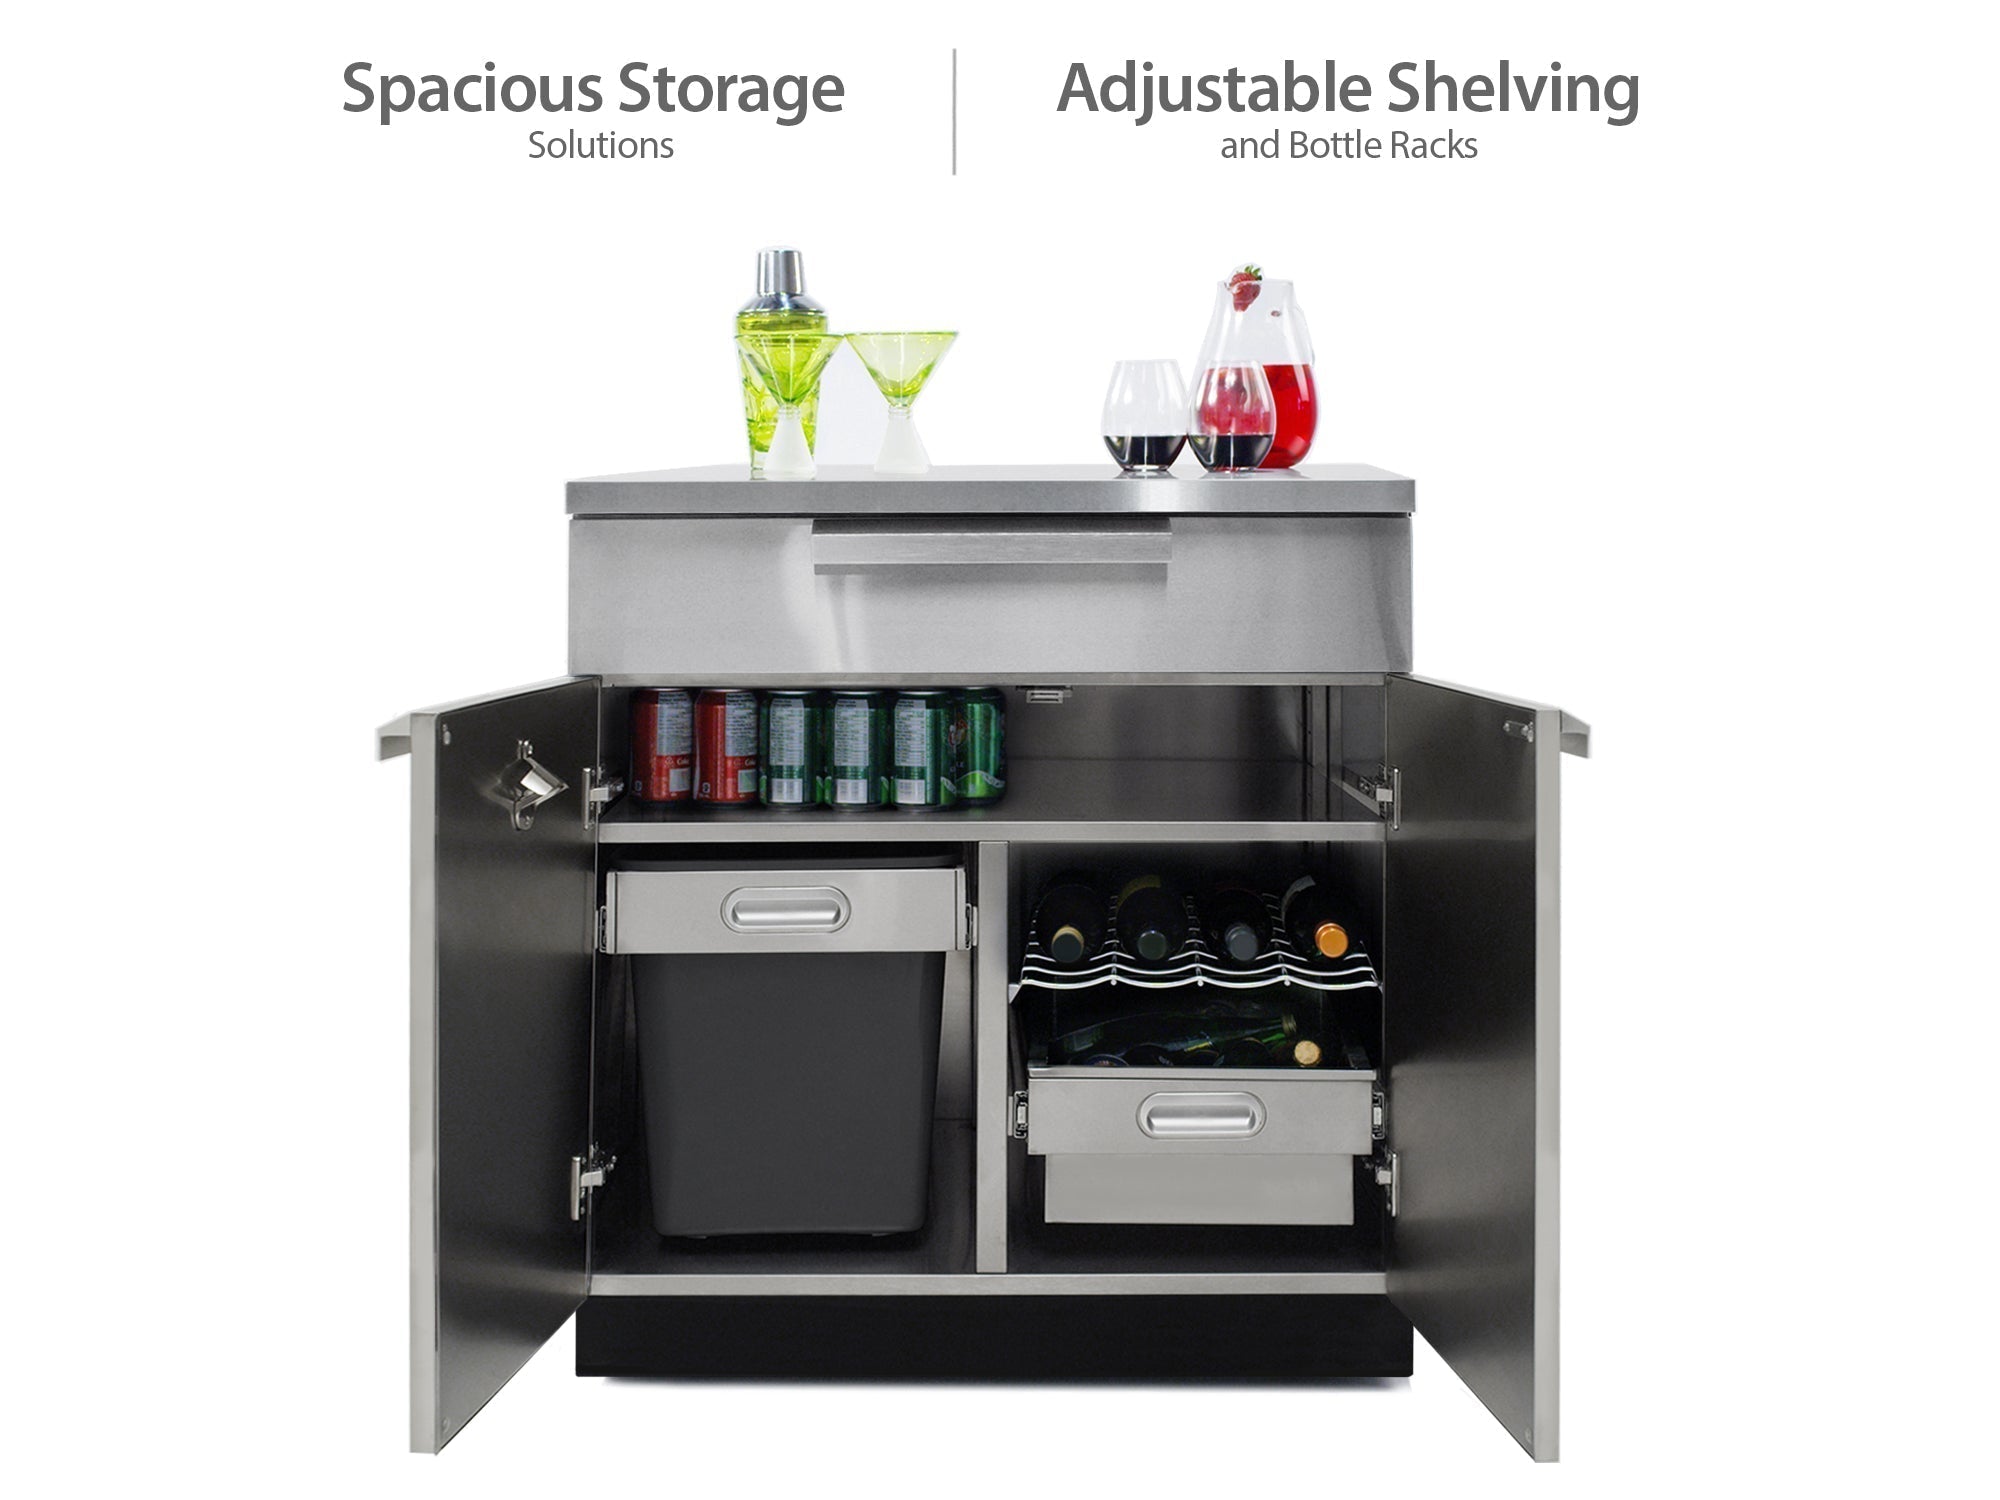 Newage Outdoor Kitchen 3 PC Cabinet Set in Stainless Steel - 65087